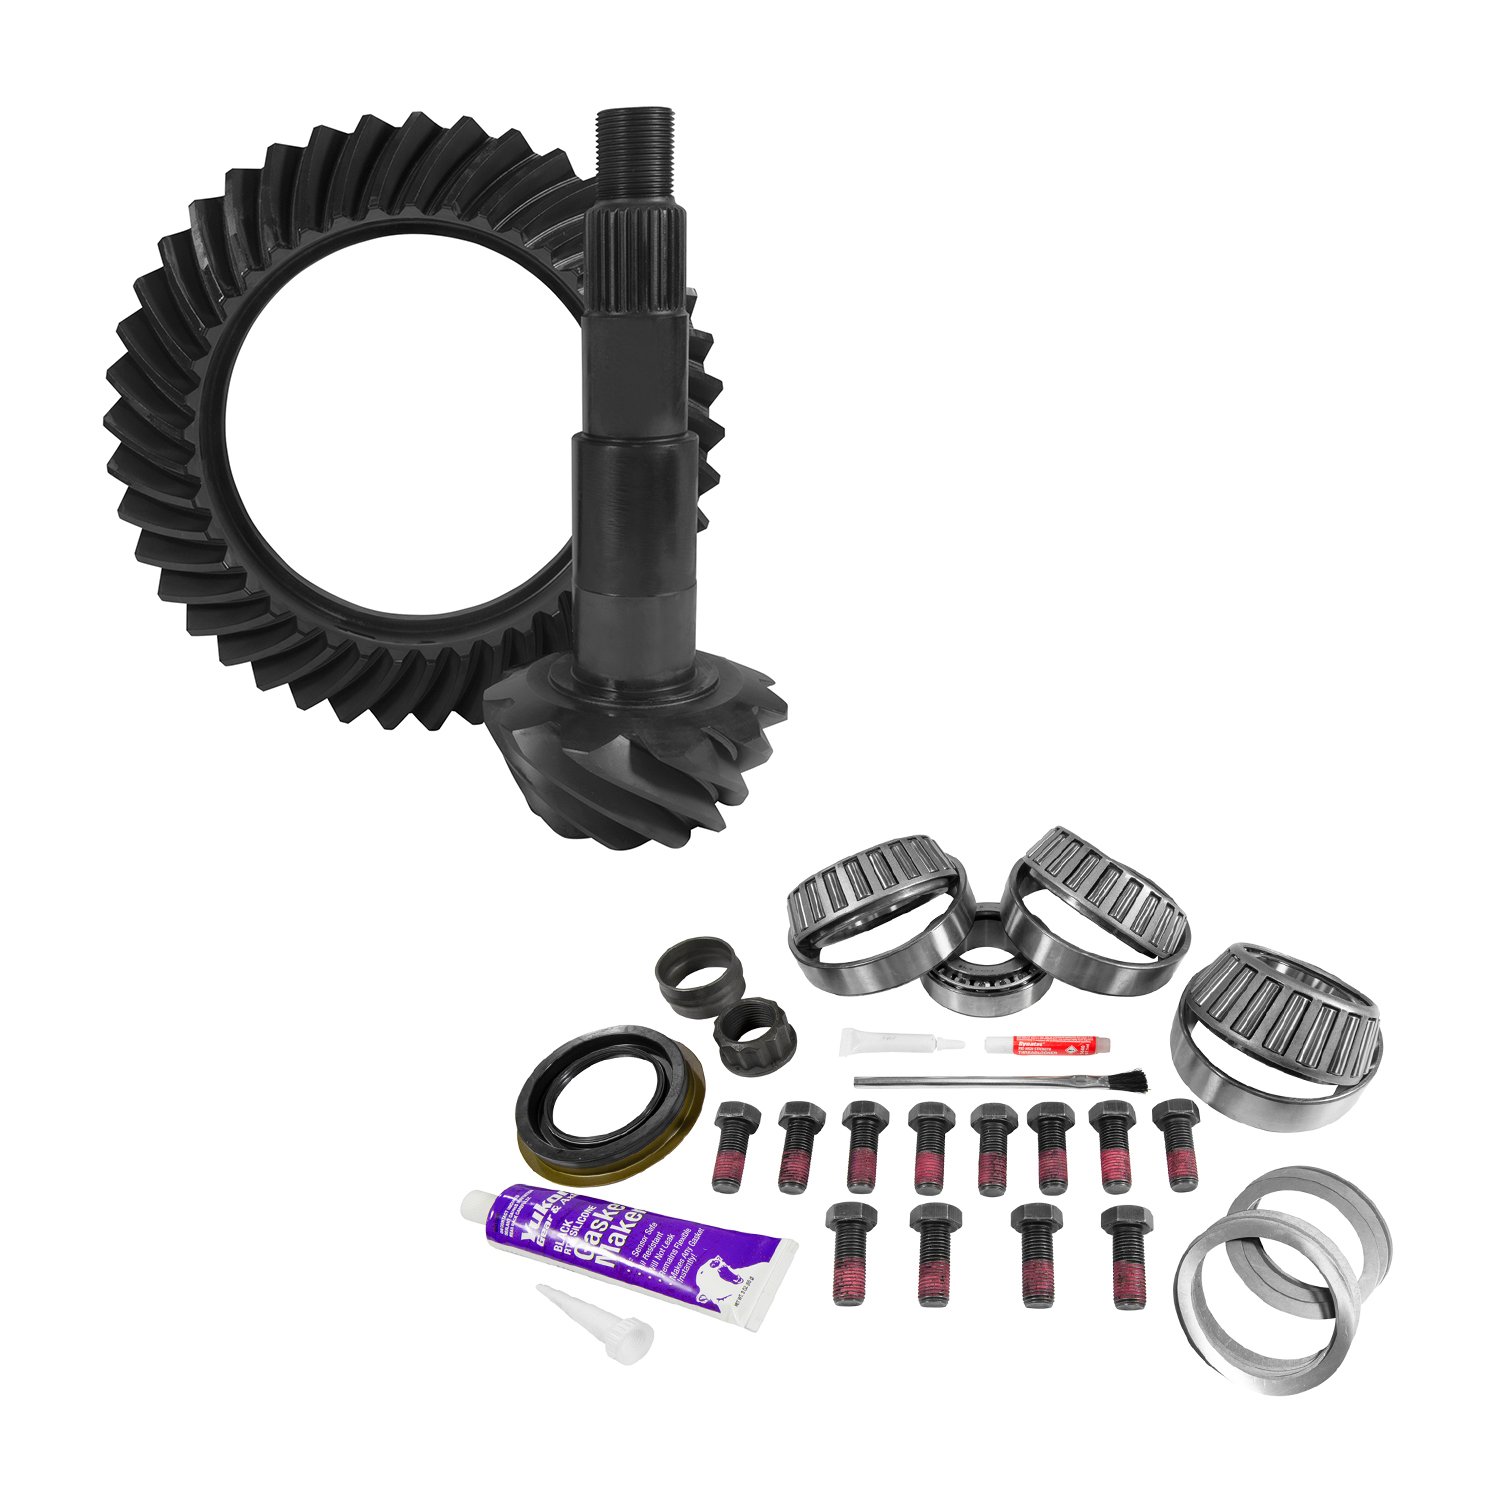 USA Standard 10820 11.5 in. Aam 4.11 Rear Ring & Pinion Install Kit, 4.125 in. Od Pinion Bearing